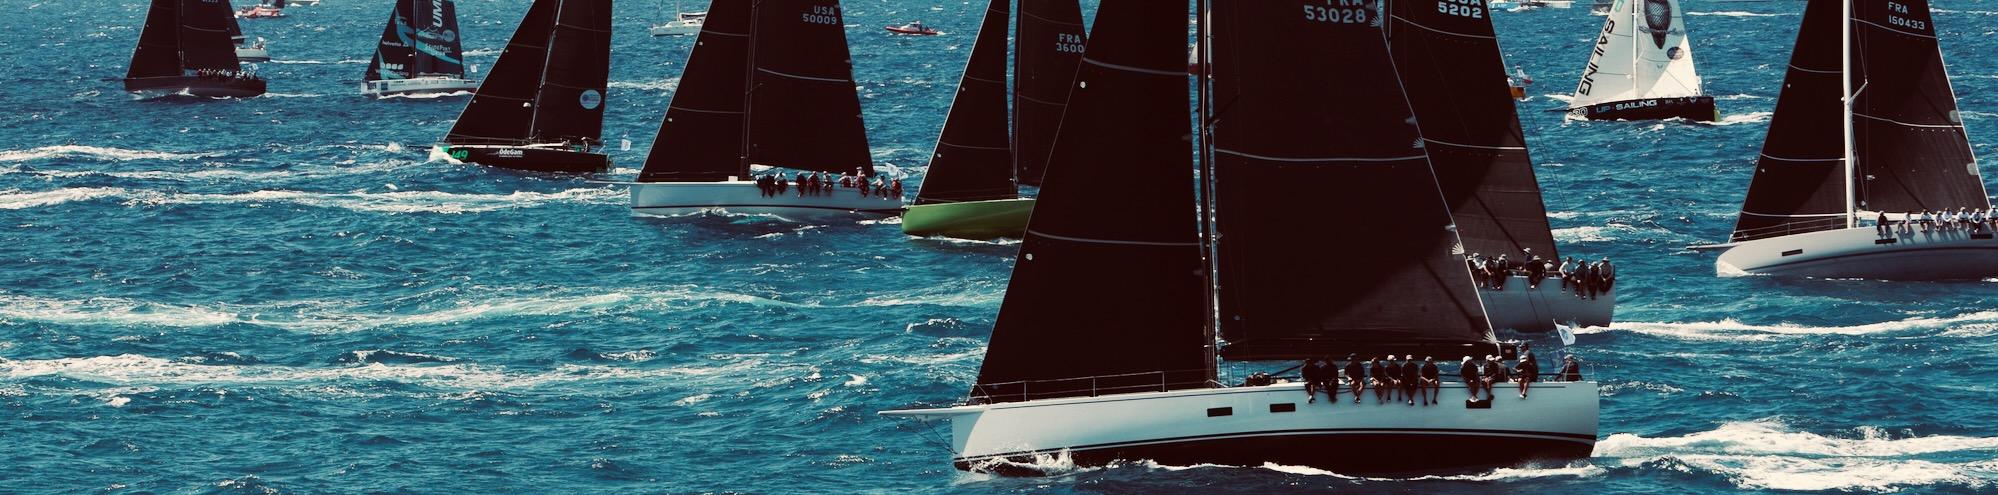 The Royal Ocean Racing Club is all set for the 15th edition of the RORC Caribbean 600, organised in association with the Antigua Yacht Club. Close to 65 teams are expected to be competing with 500 sailors from 26 different countries racing in a huge diversity of boats.